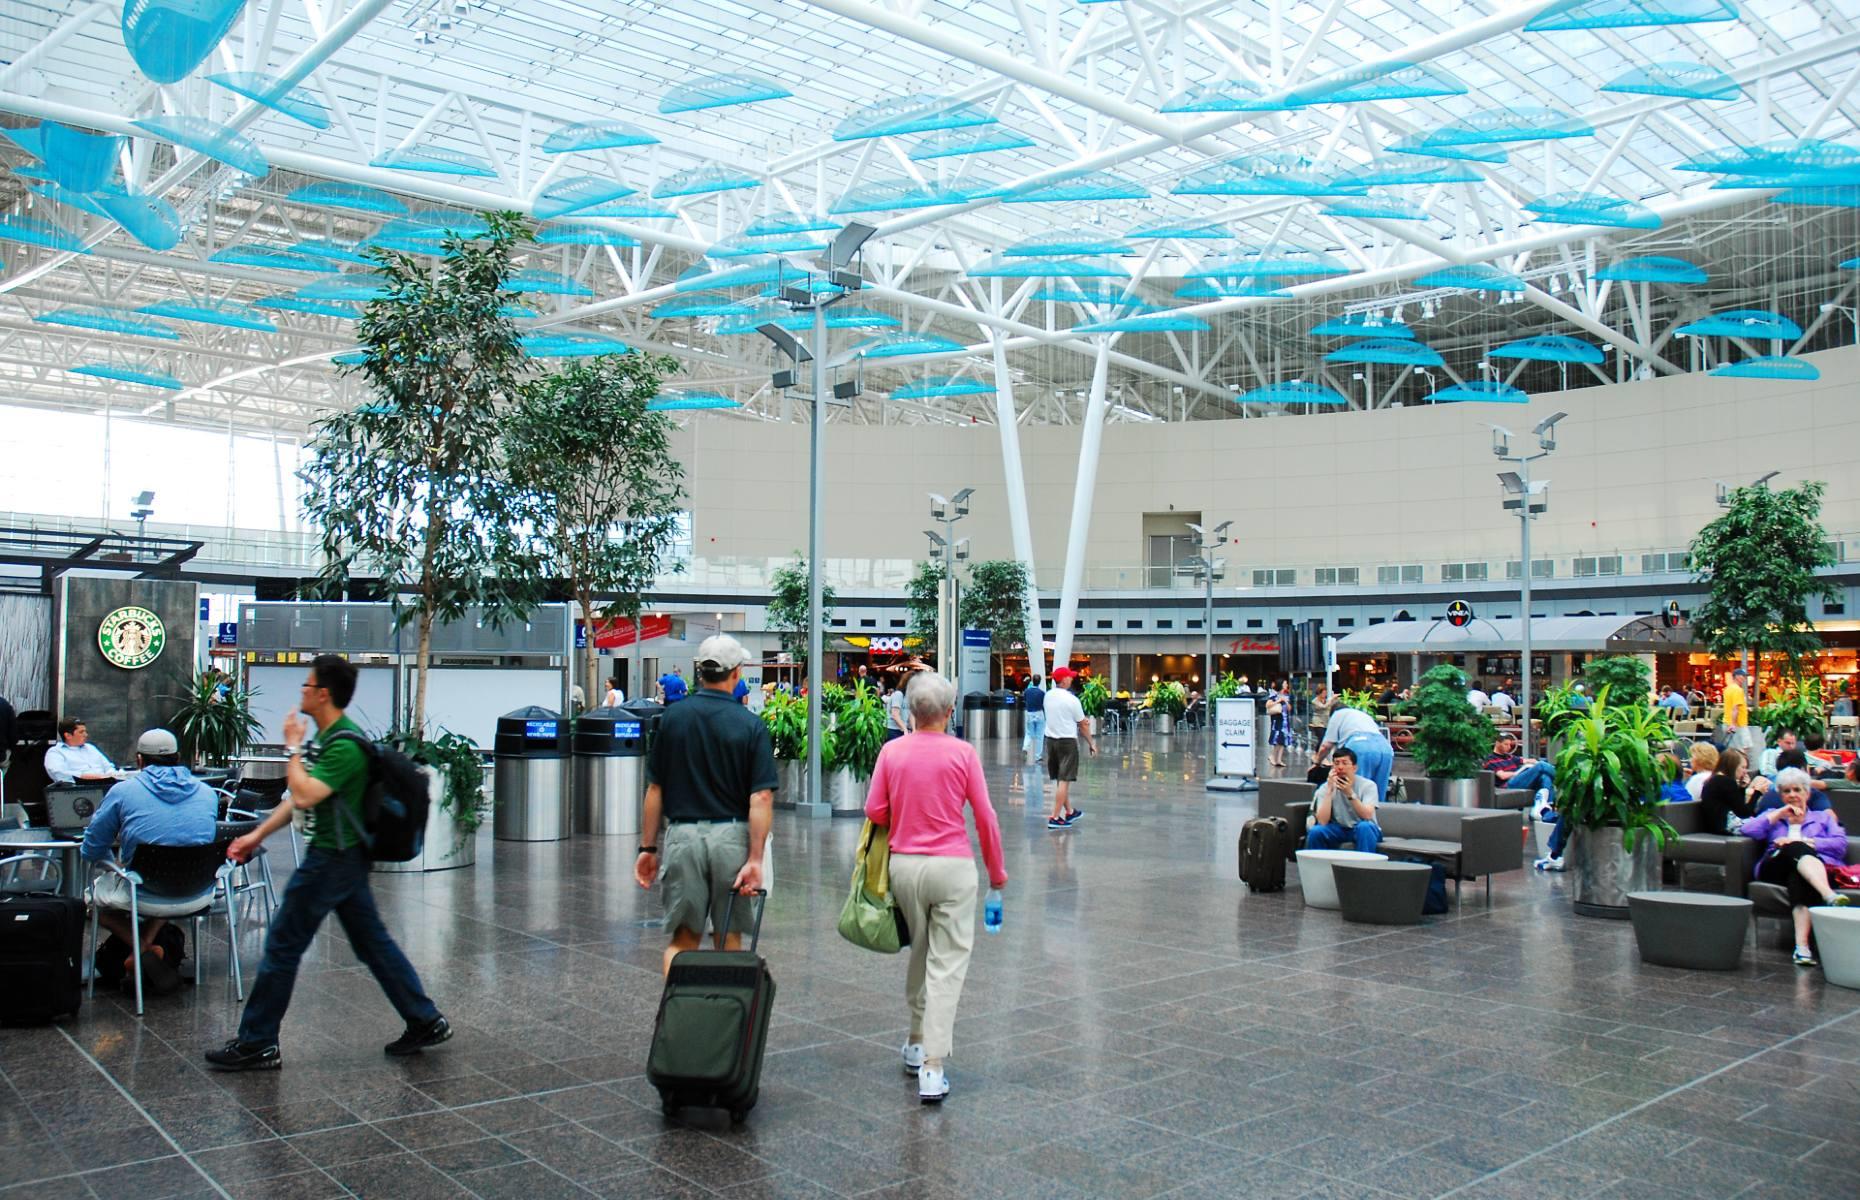 <p>Clean, spacious and modern, <a href="https://www.ind.com/">Indianapolis International Airport</a> is a hit with travelers: <a href="https://www.yelp.com/biz/indianapolis-international-airport-ind-indianapolis">one recent reviewer</a> even called it “one of the best airports in the country”. The airport, located seven miles (11km) southwest of its namesake city, provides service to 49 non-stop destinations across North America, <a href="https://eu.indystar.com/story/news/local/transportation/2021/10/19/indianapolis-airport-added-22-new-direct-flights-2021-list/8510362002/">22 of which were added in 2021</a>. To make life even easier before you fly, its website lists up-to-date information about security wait times and parking lot capacity, as well as flight information.</p>